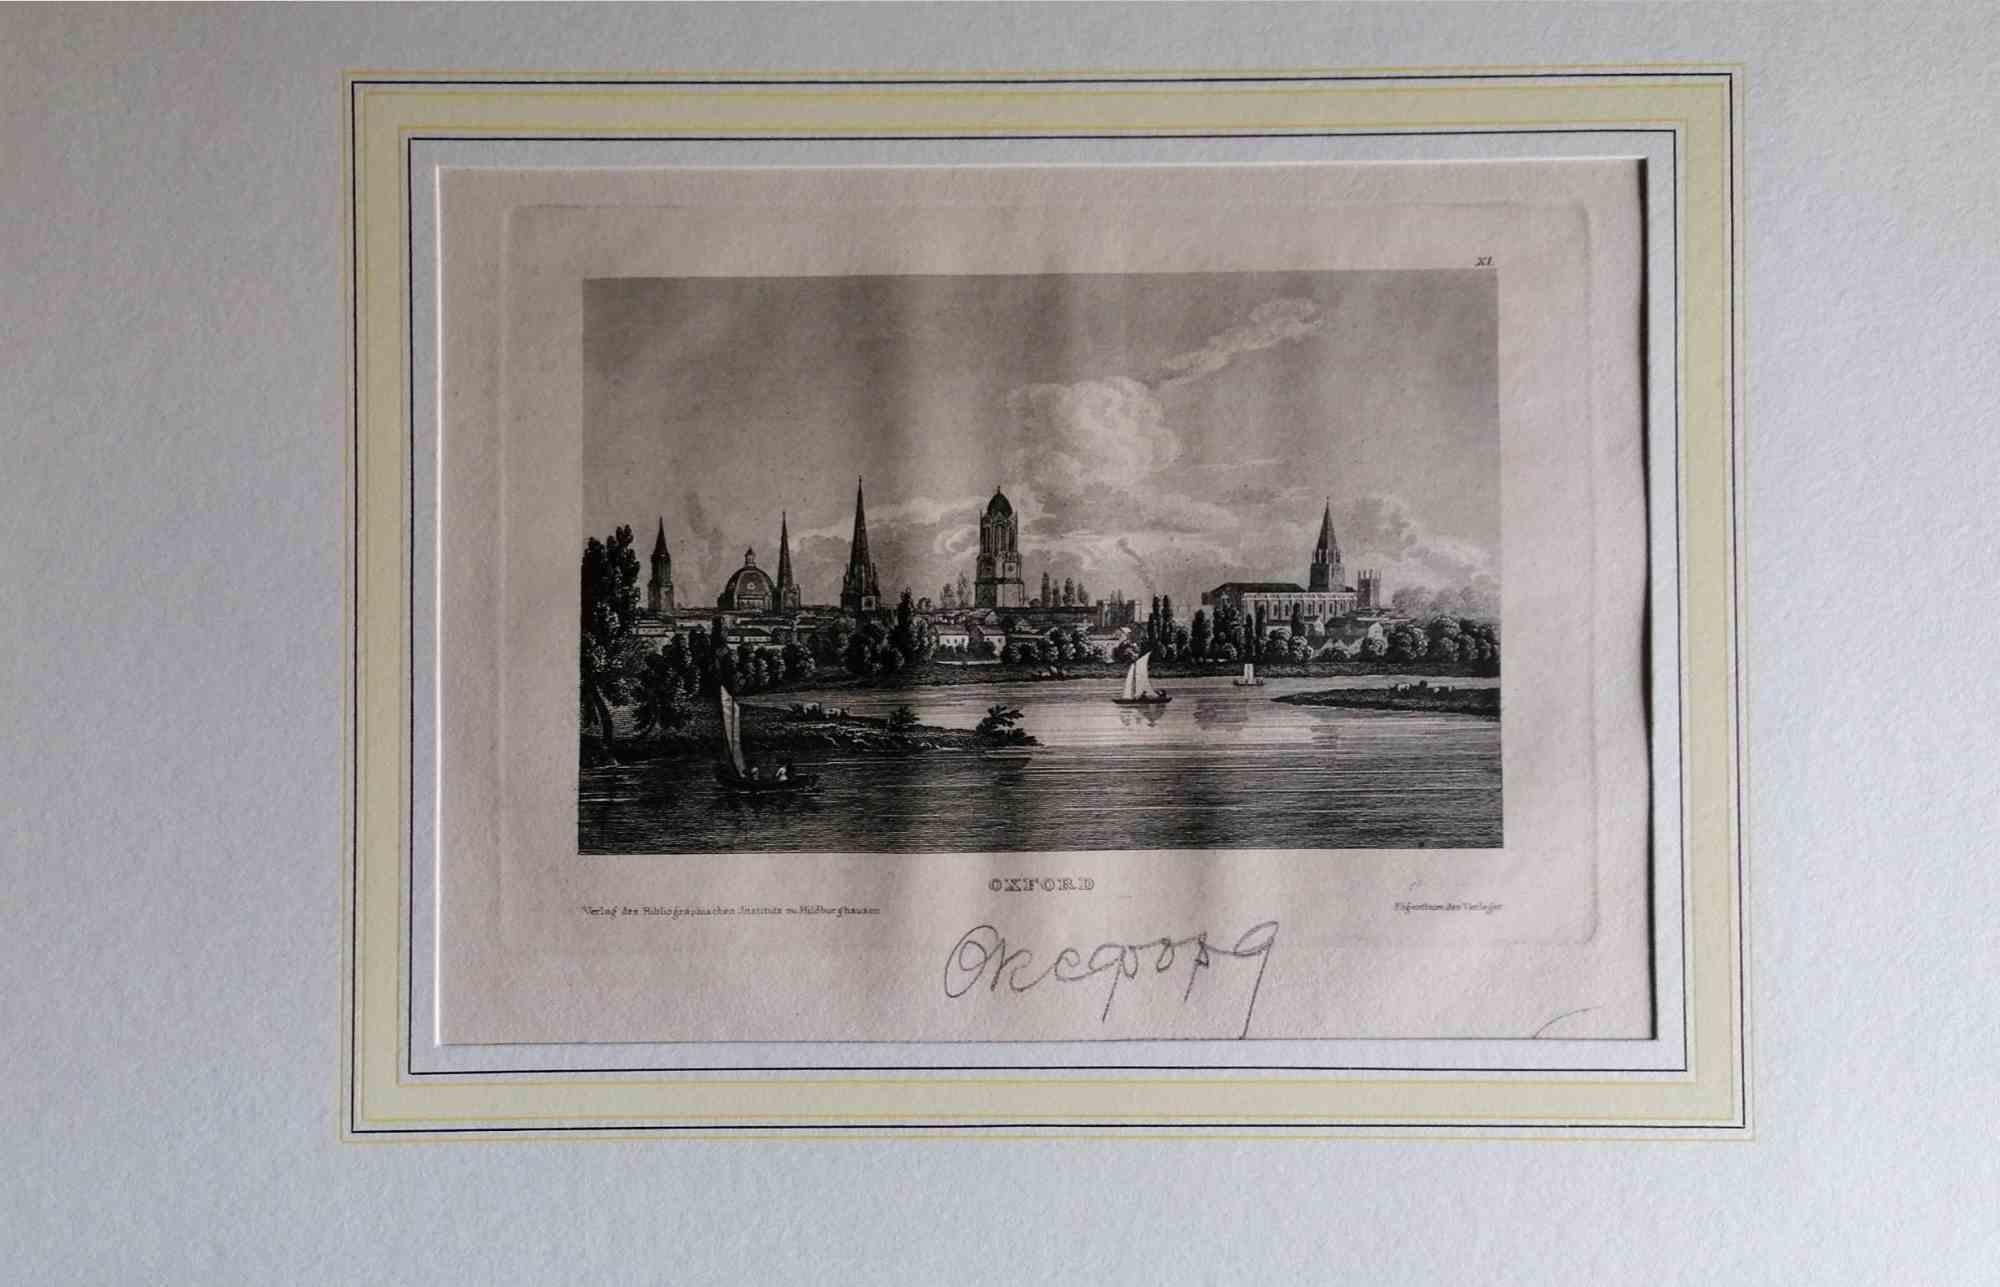 Unknown Figurative Print - Ancient View of Oxford - Original Lithograph - Mid-19th Century